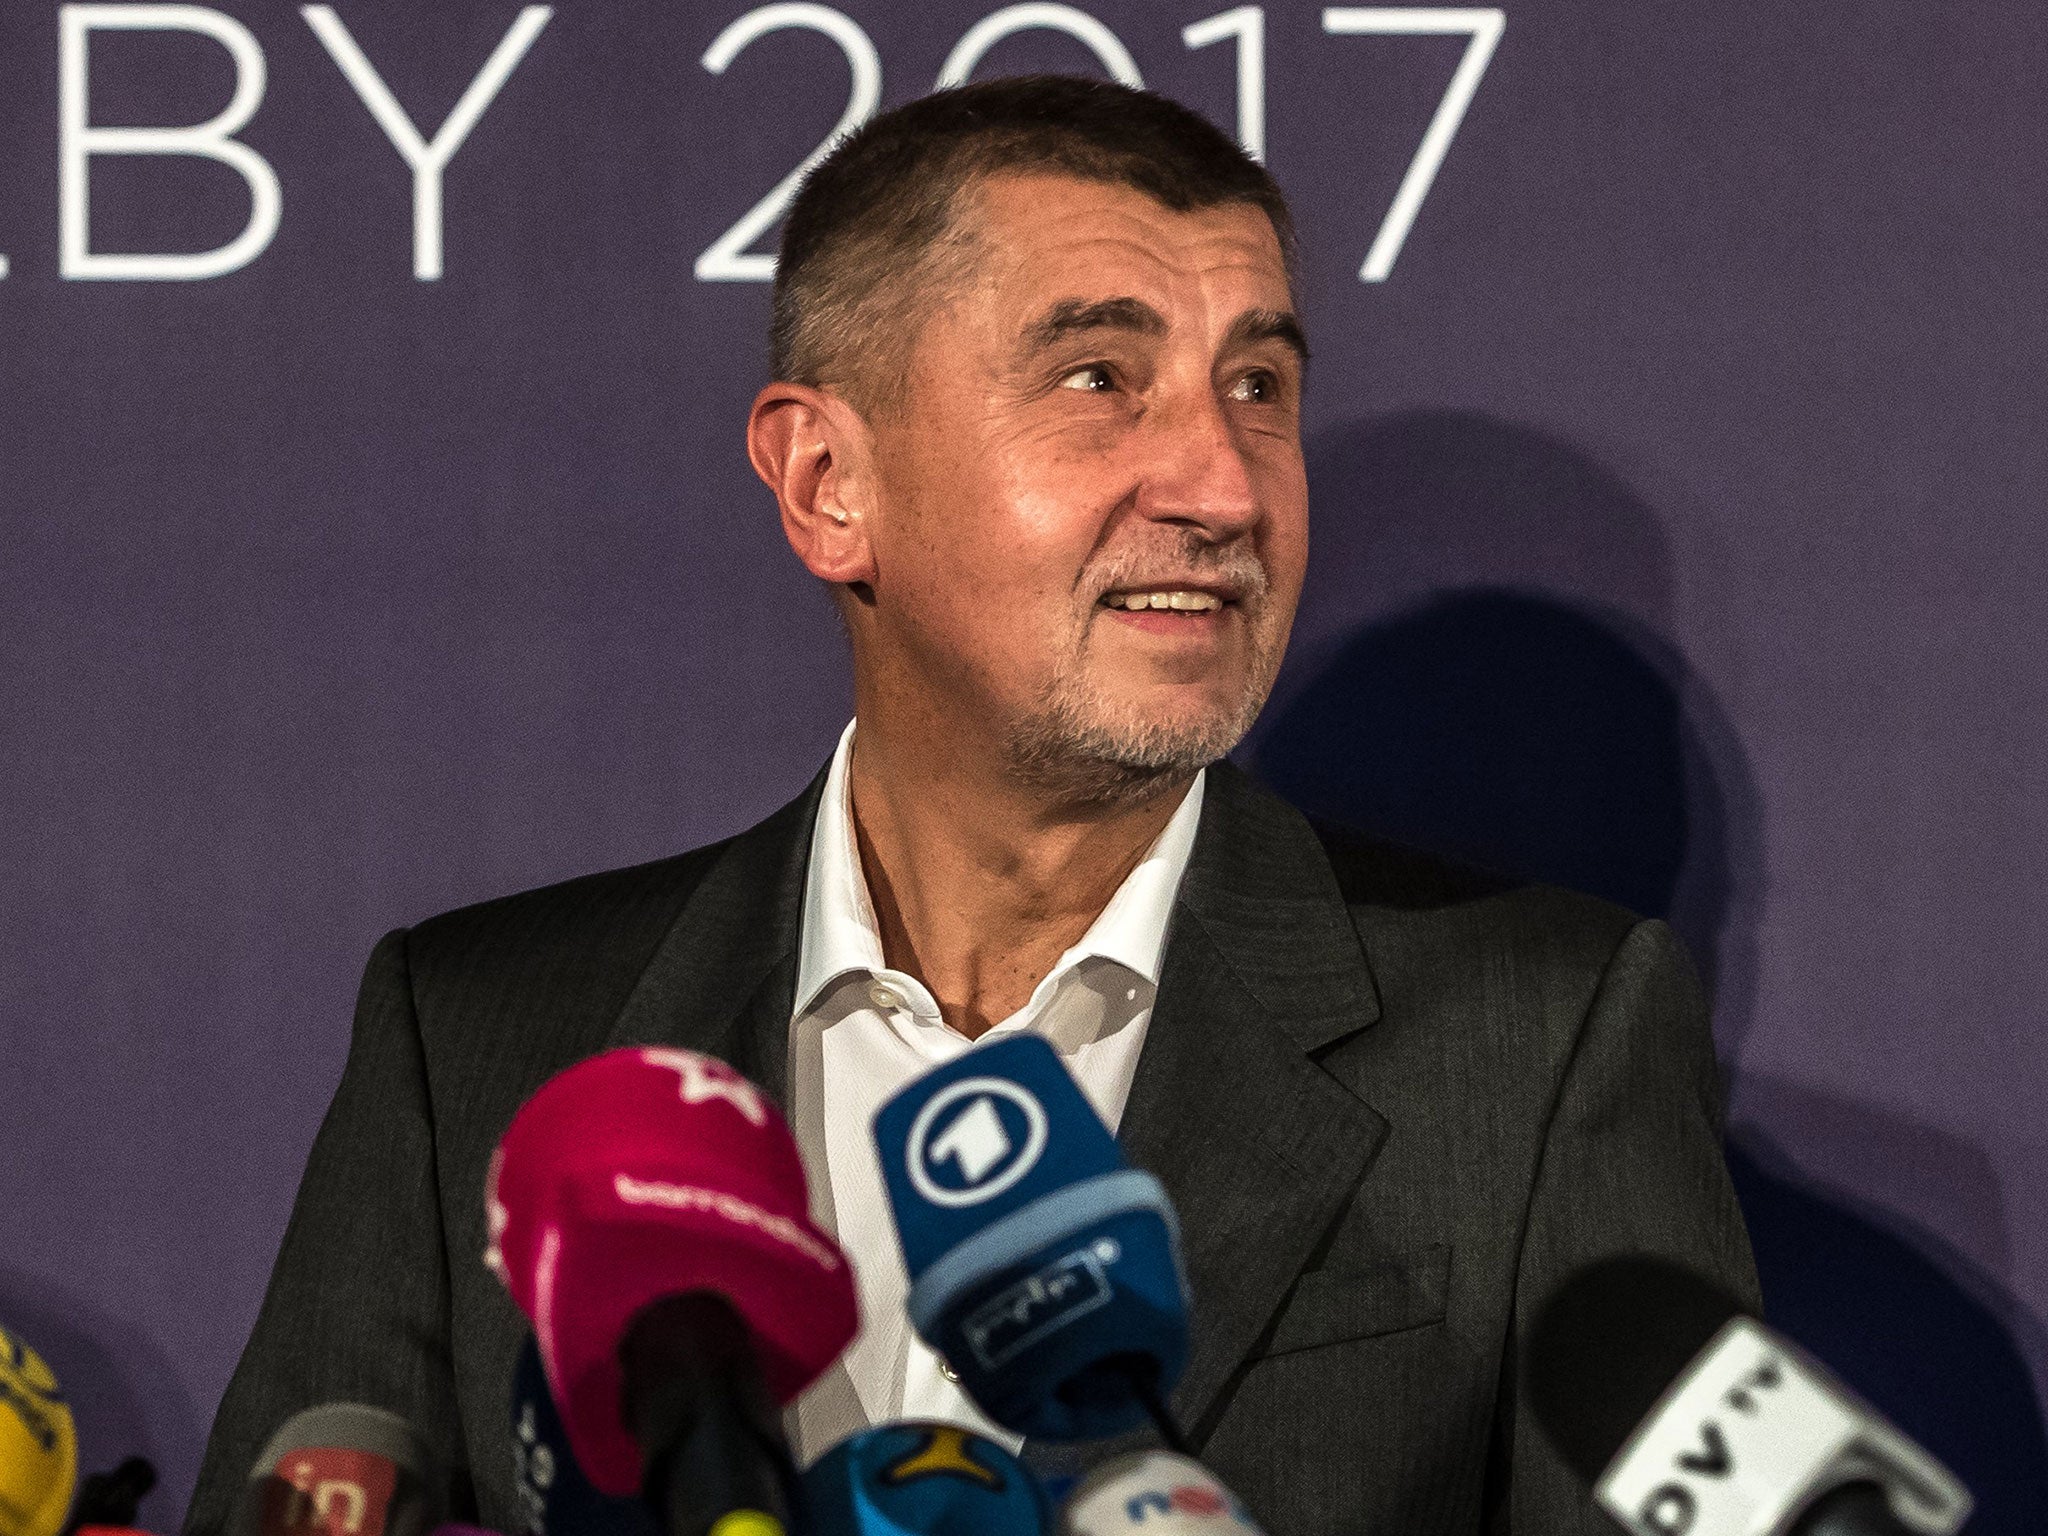 ANO leader Andrej Babiš won 78 of the 200 seats in the lower house of parliament